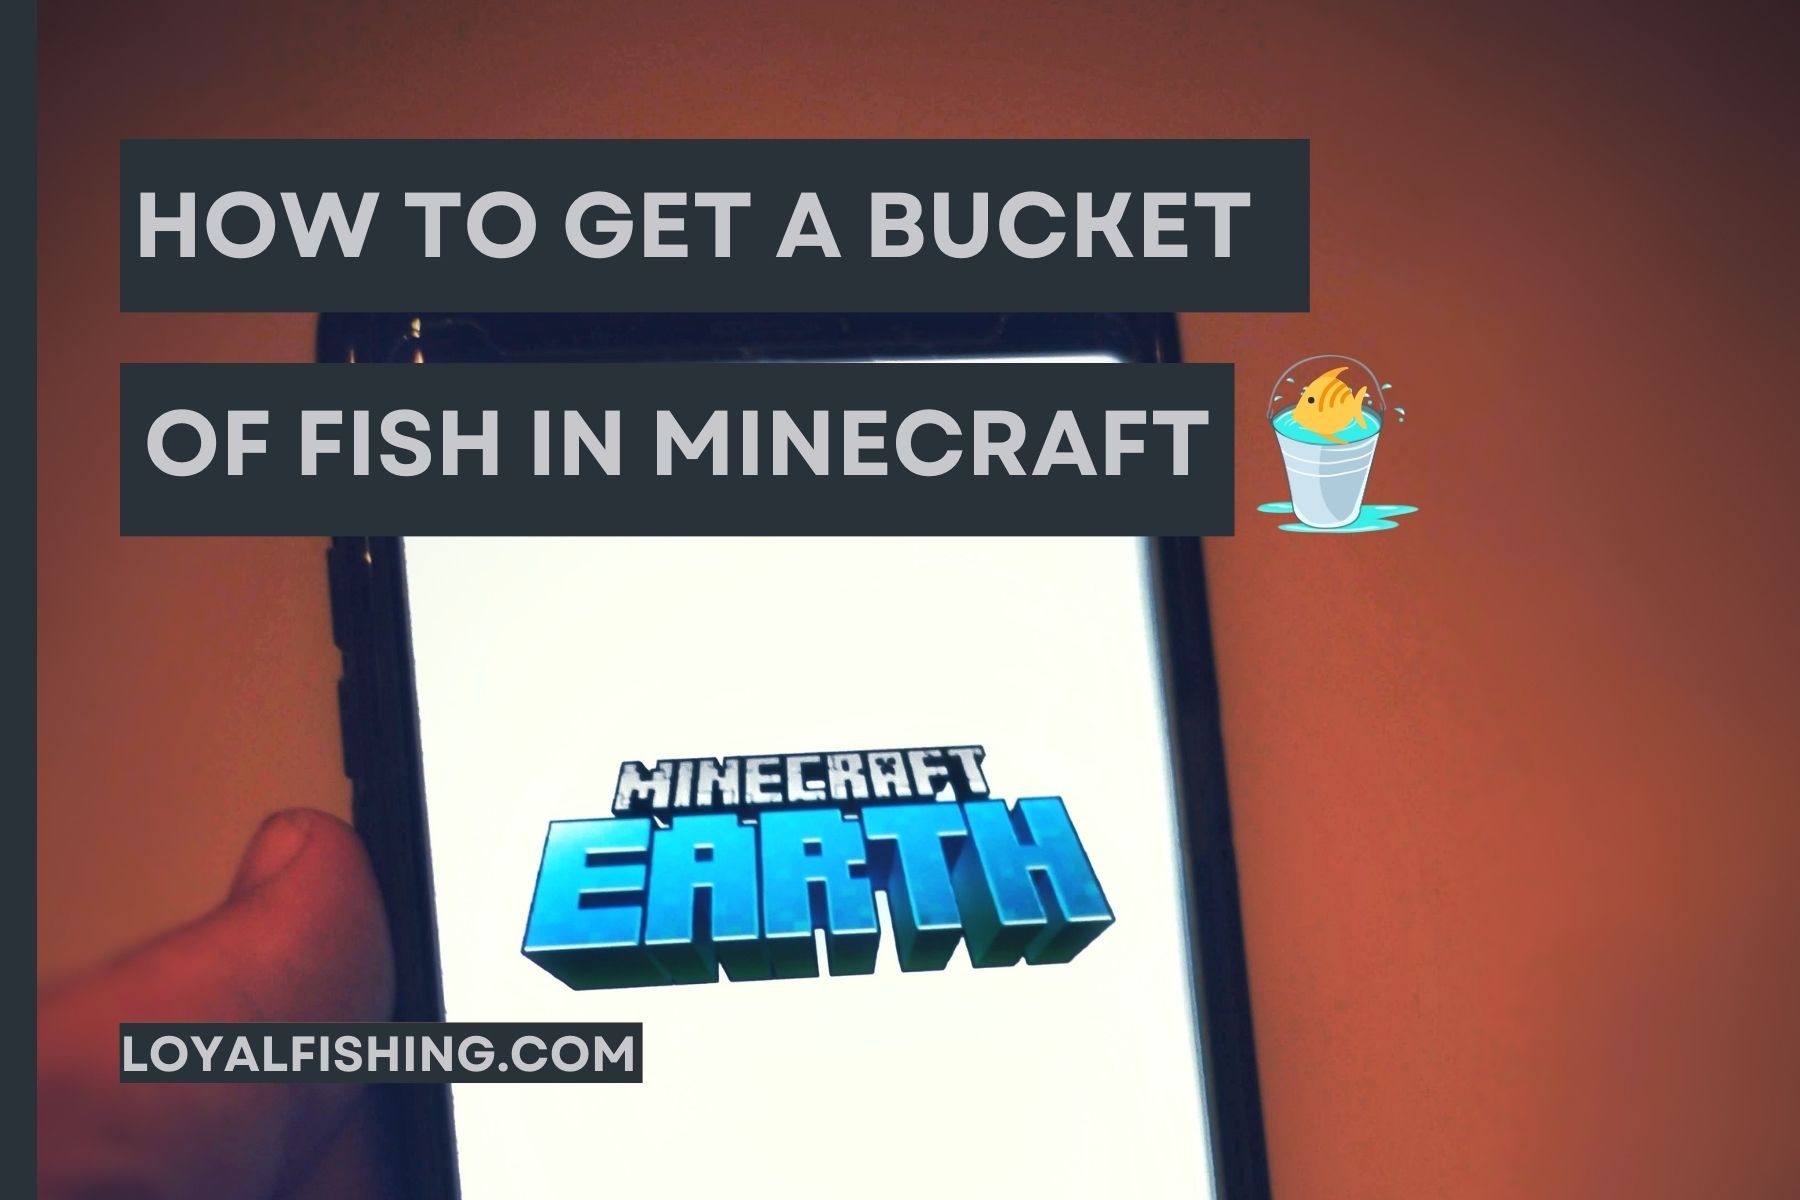 How To Get a Bucket of Fish in Minecraft